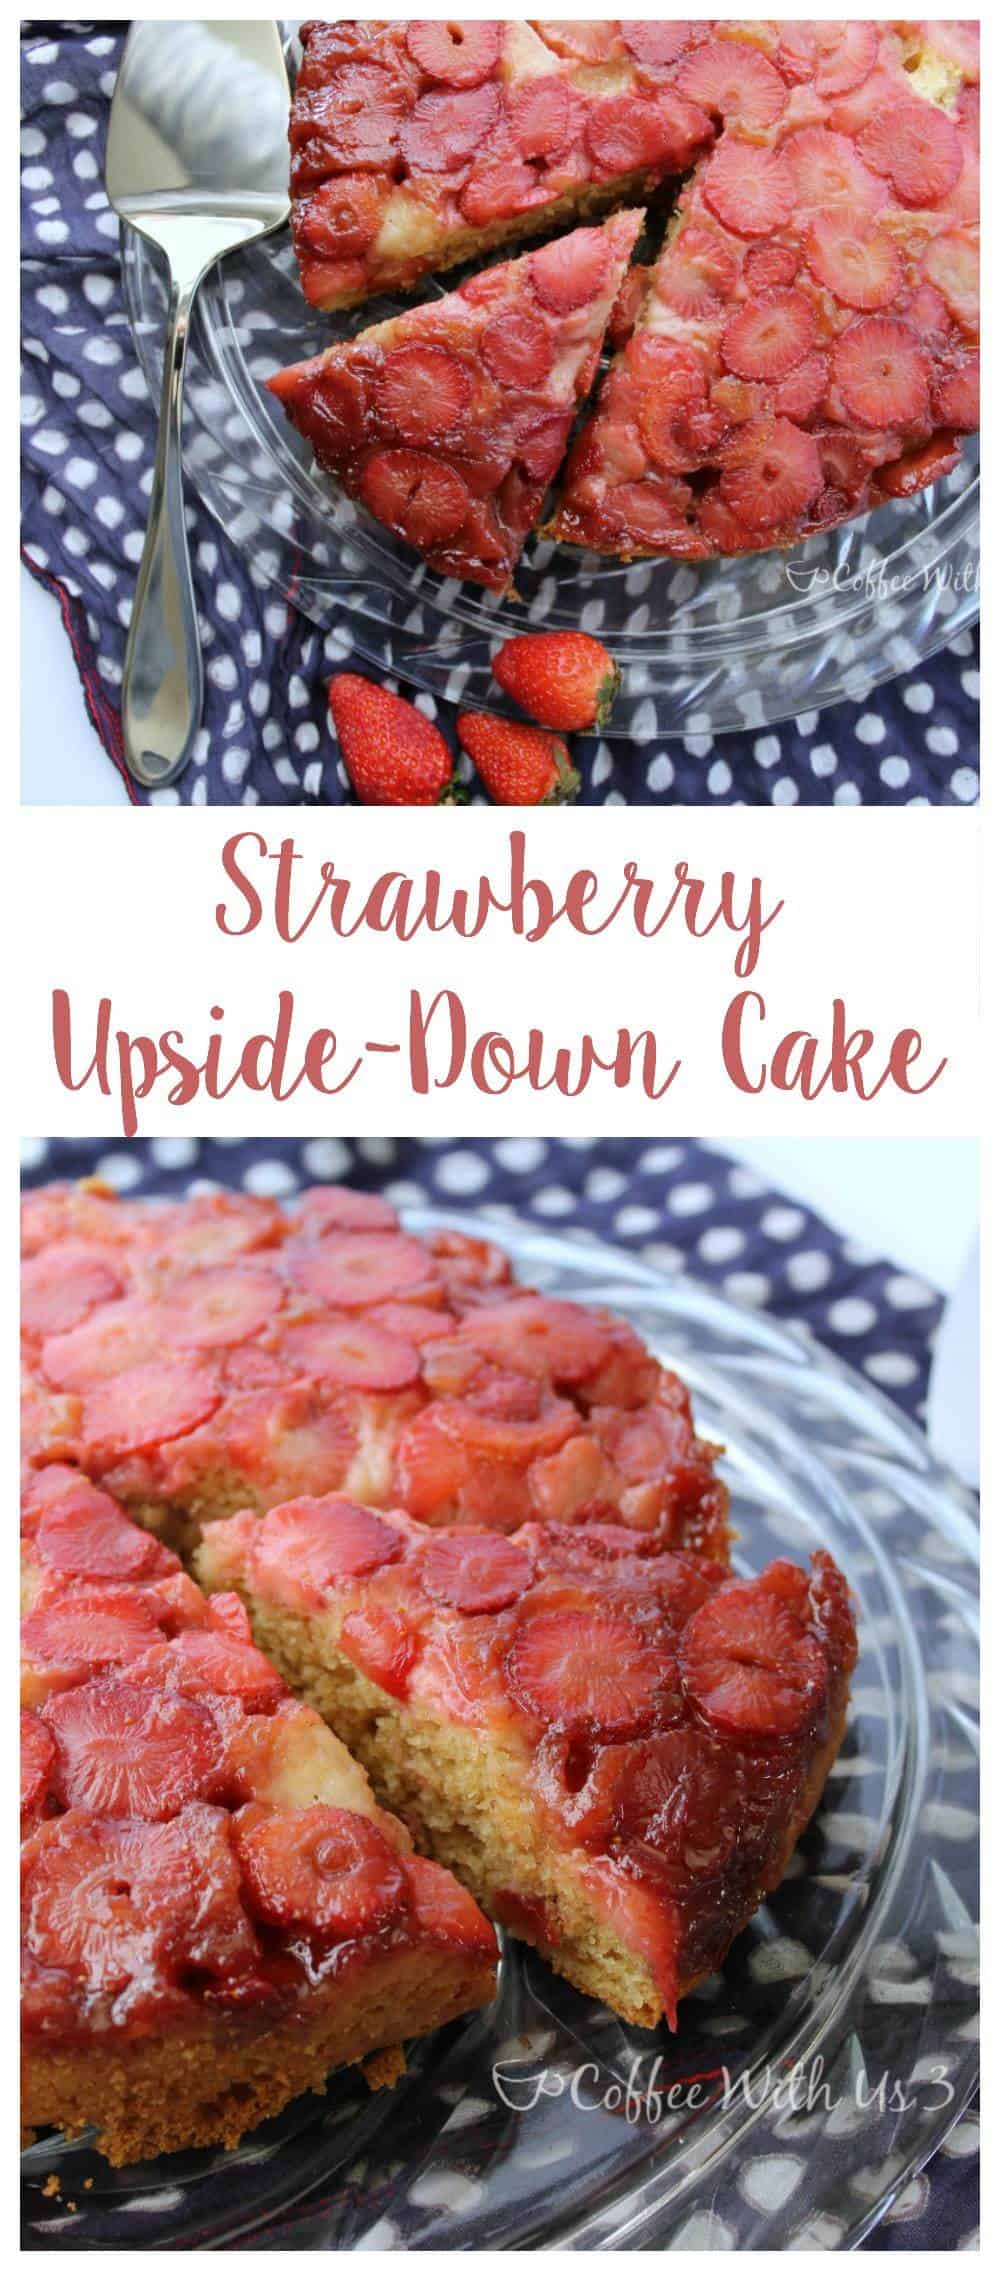 Made from scratch Strawberry Upside-Down Cake from Coffee With Us 3